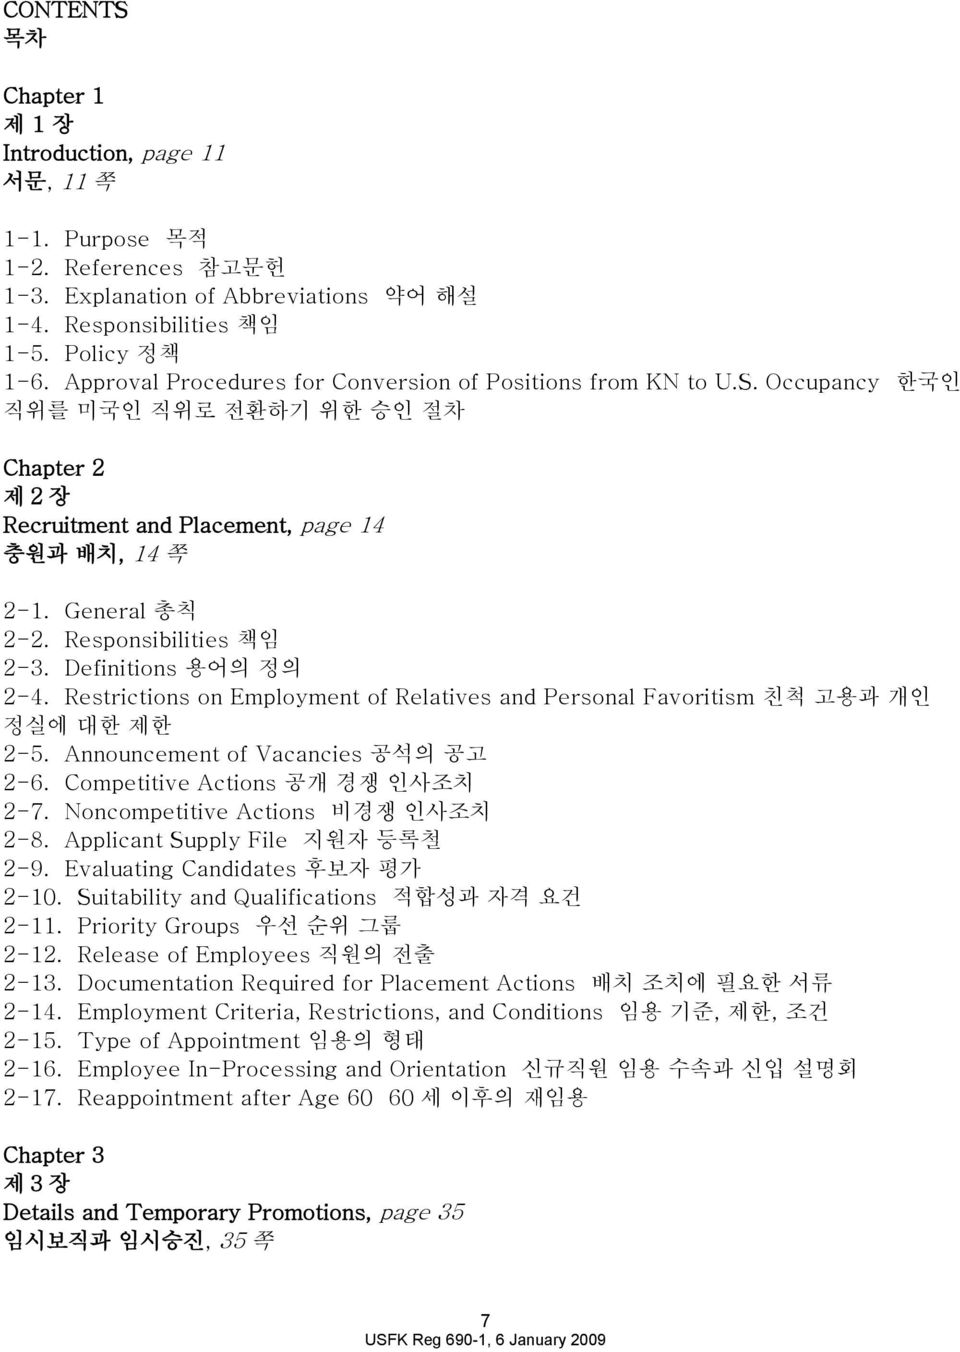 Responsibilities 책임 2-3. Definitions 용어의 정의 2-4. Restrictions on Employment of Relatives and Personal Favoritism 친척 고용과 개인 정실에 대한 제한 2-5. Announcement of Vacancies 공석의 공고 2-6.